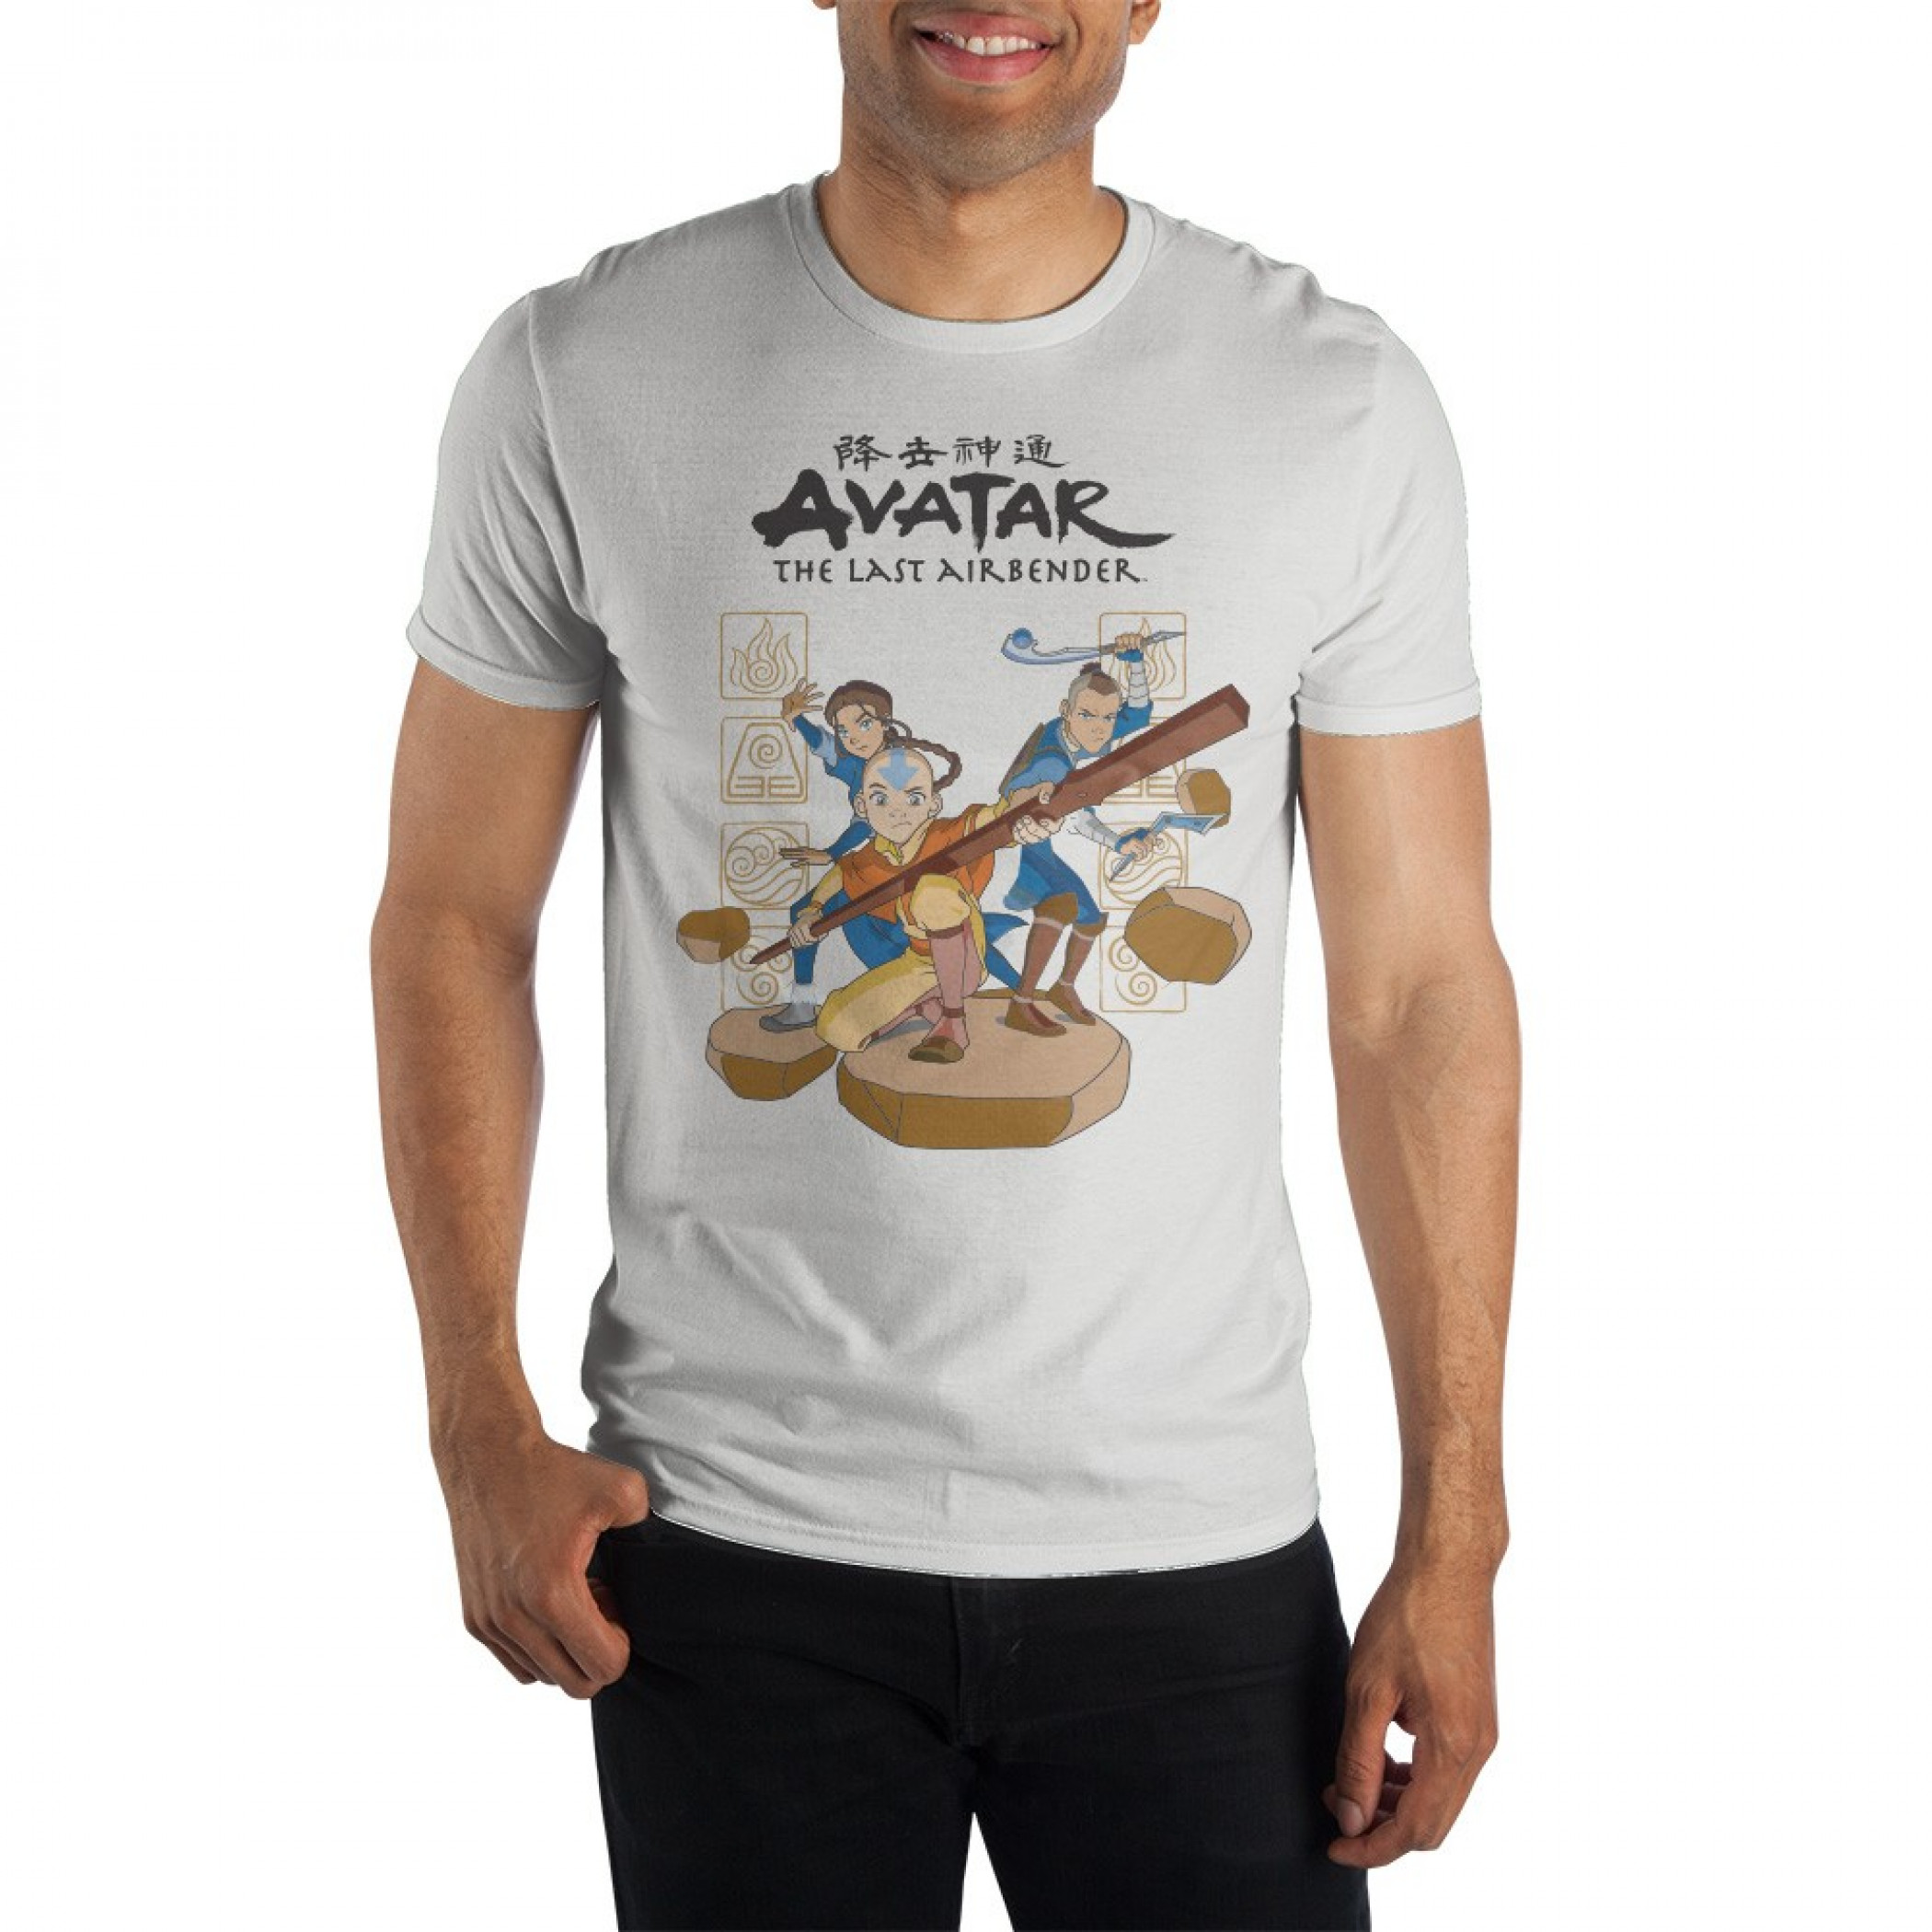 Avatar: The Last Airbender Group Stance Image T-Shirt